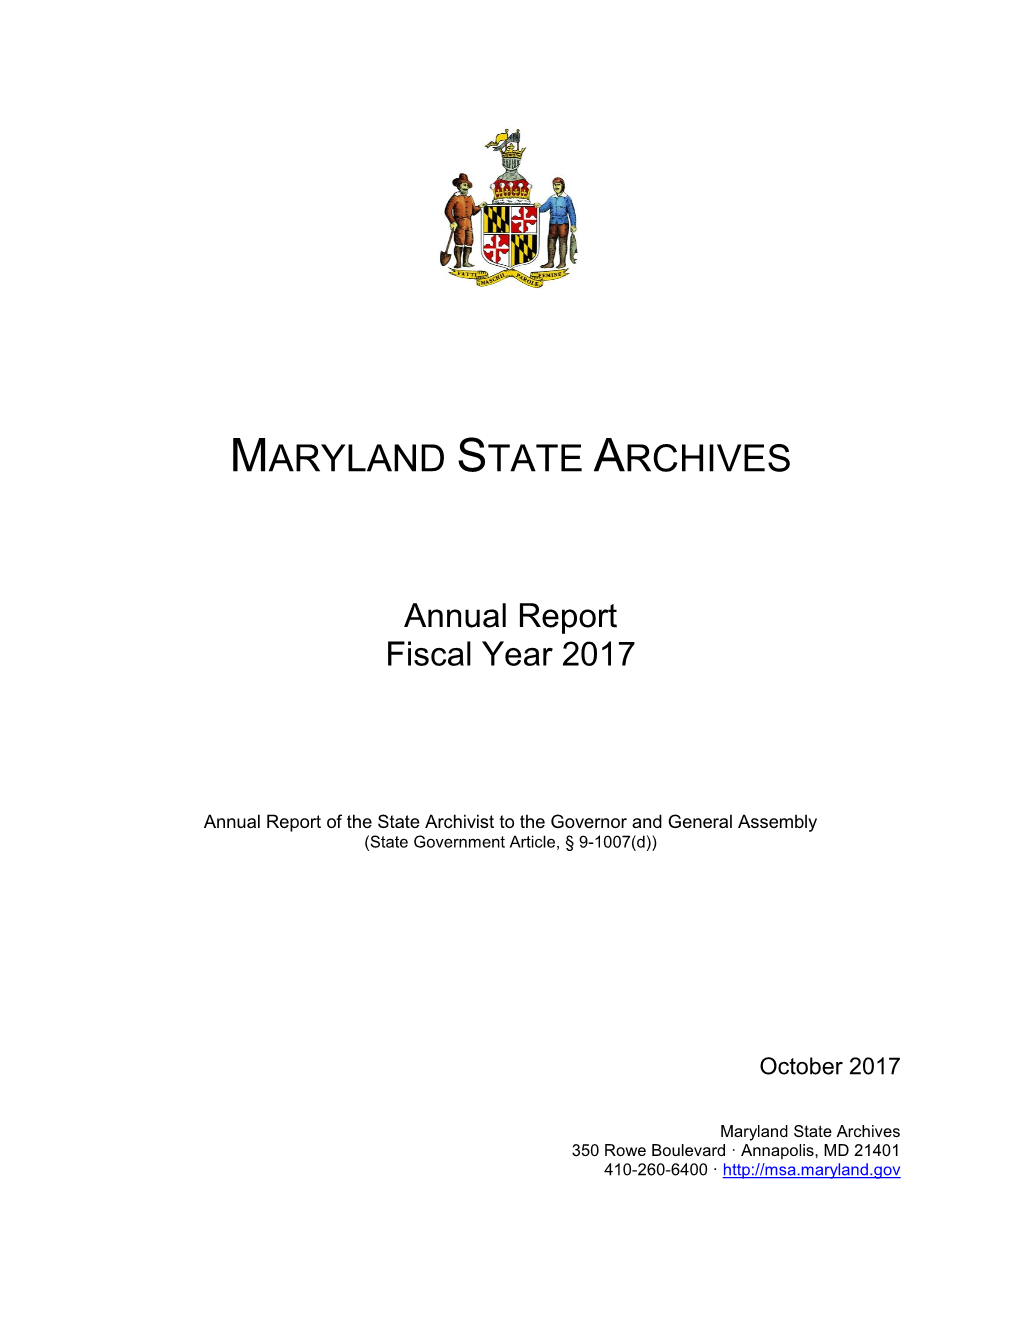 Annual Report Fiscal Year 2017